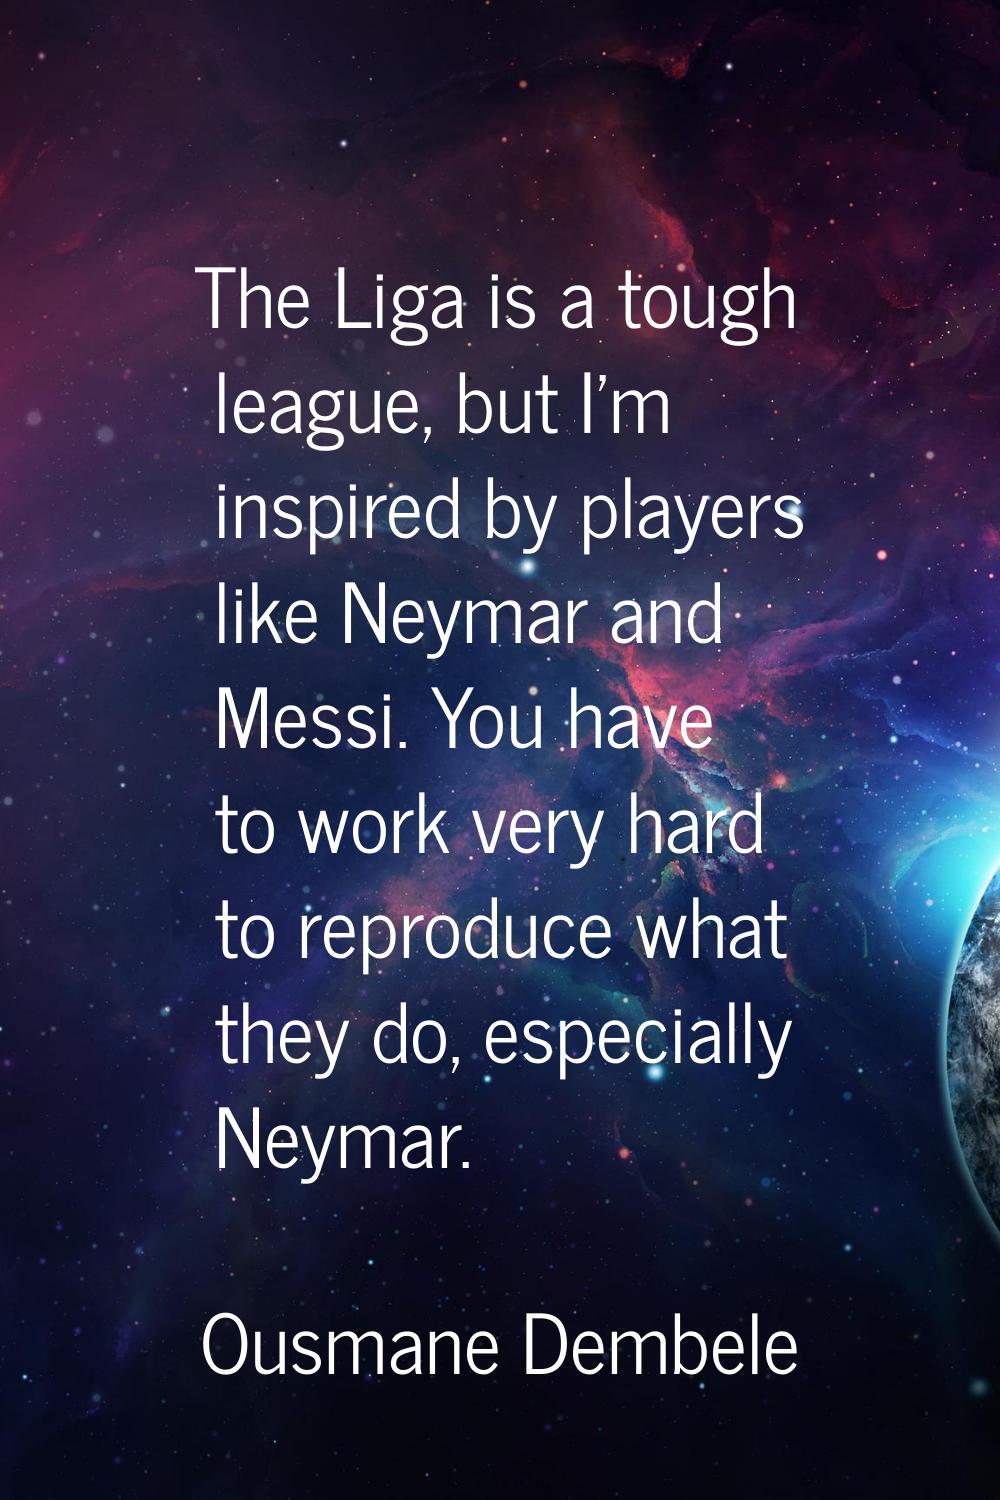 The Liga is a tough league, but I'm inspired by players like Neymar and Messi. You have to work ver